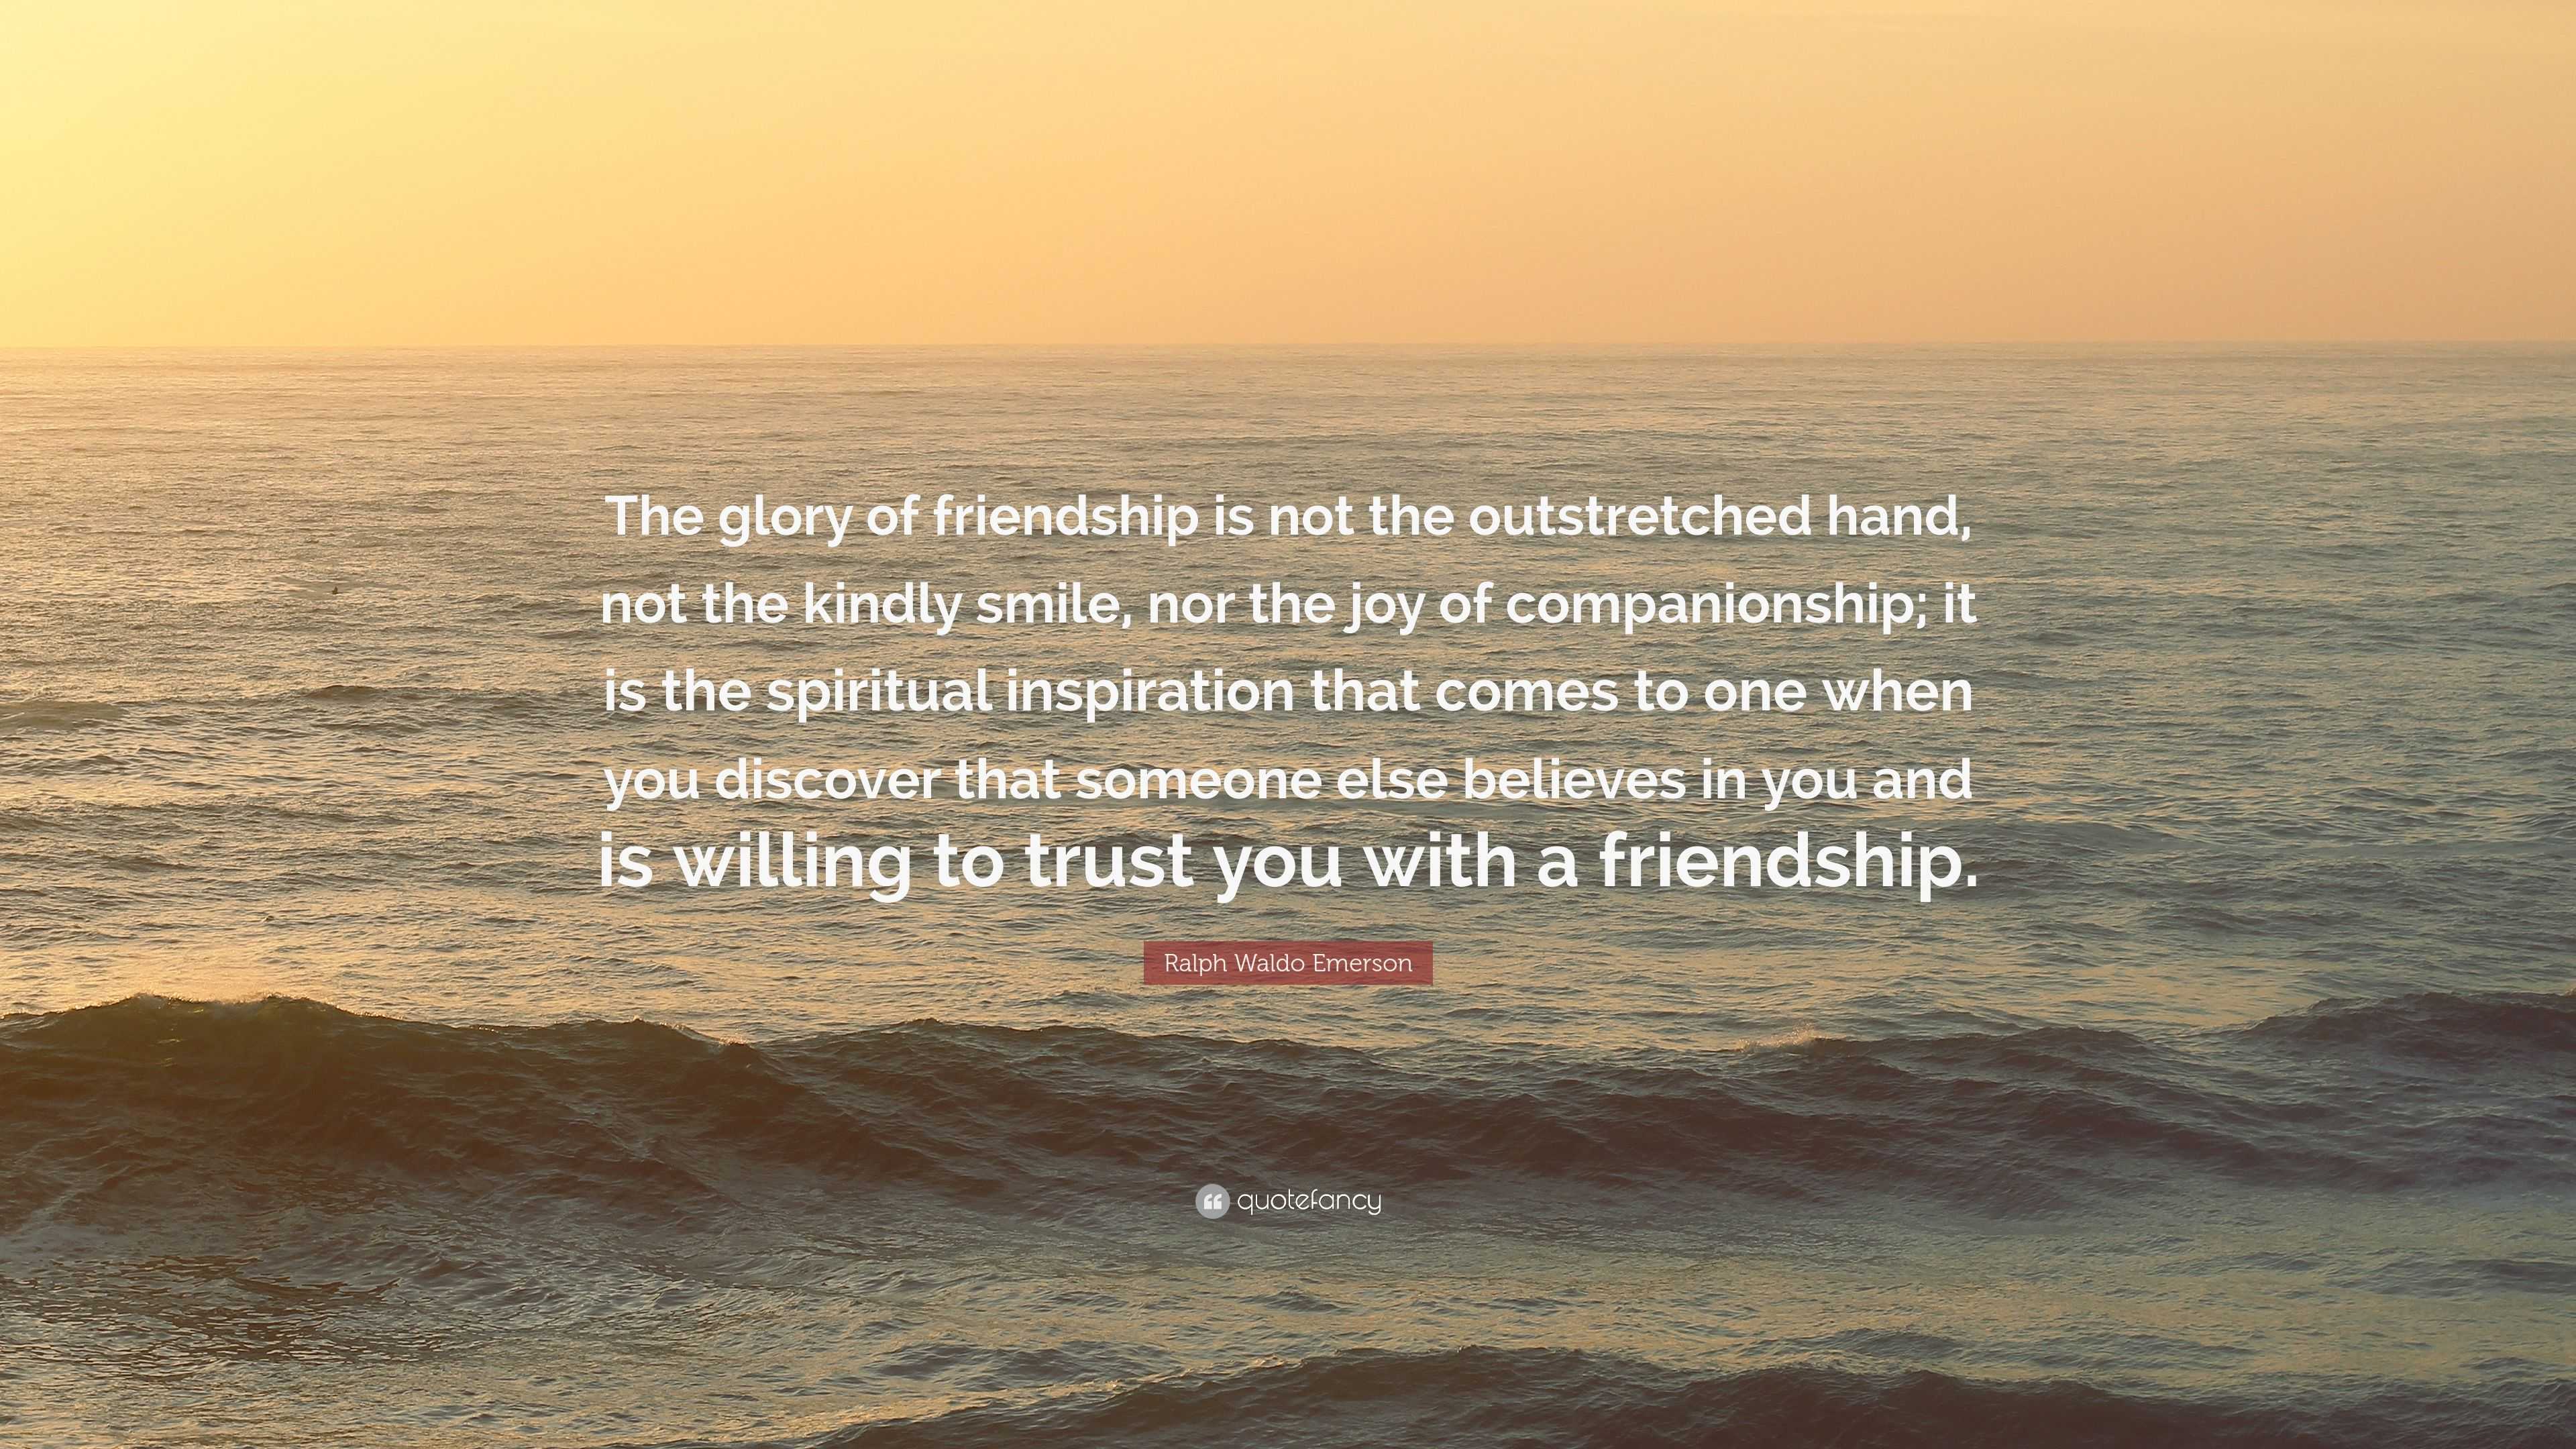 Ralph Waldo Emerson Quote: “The glory of friendship is not the